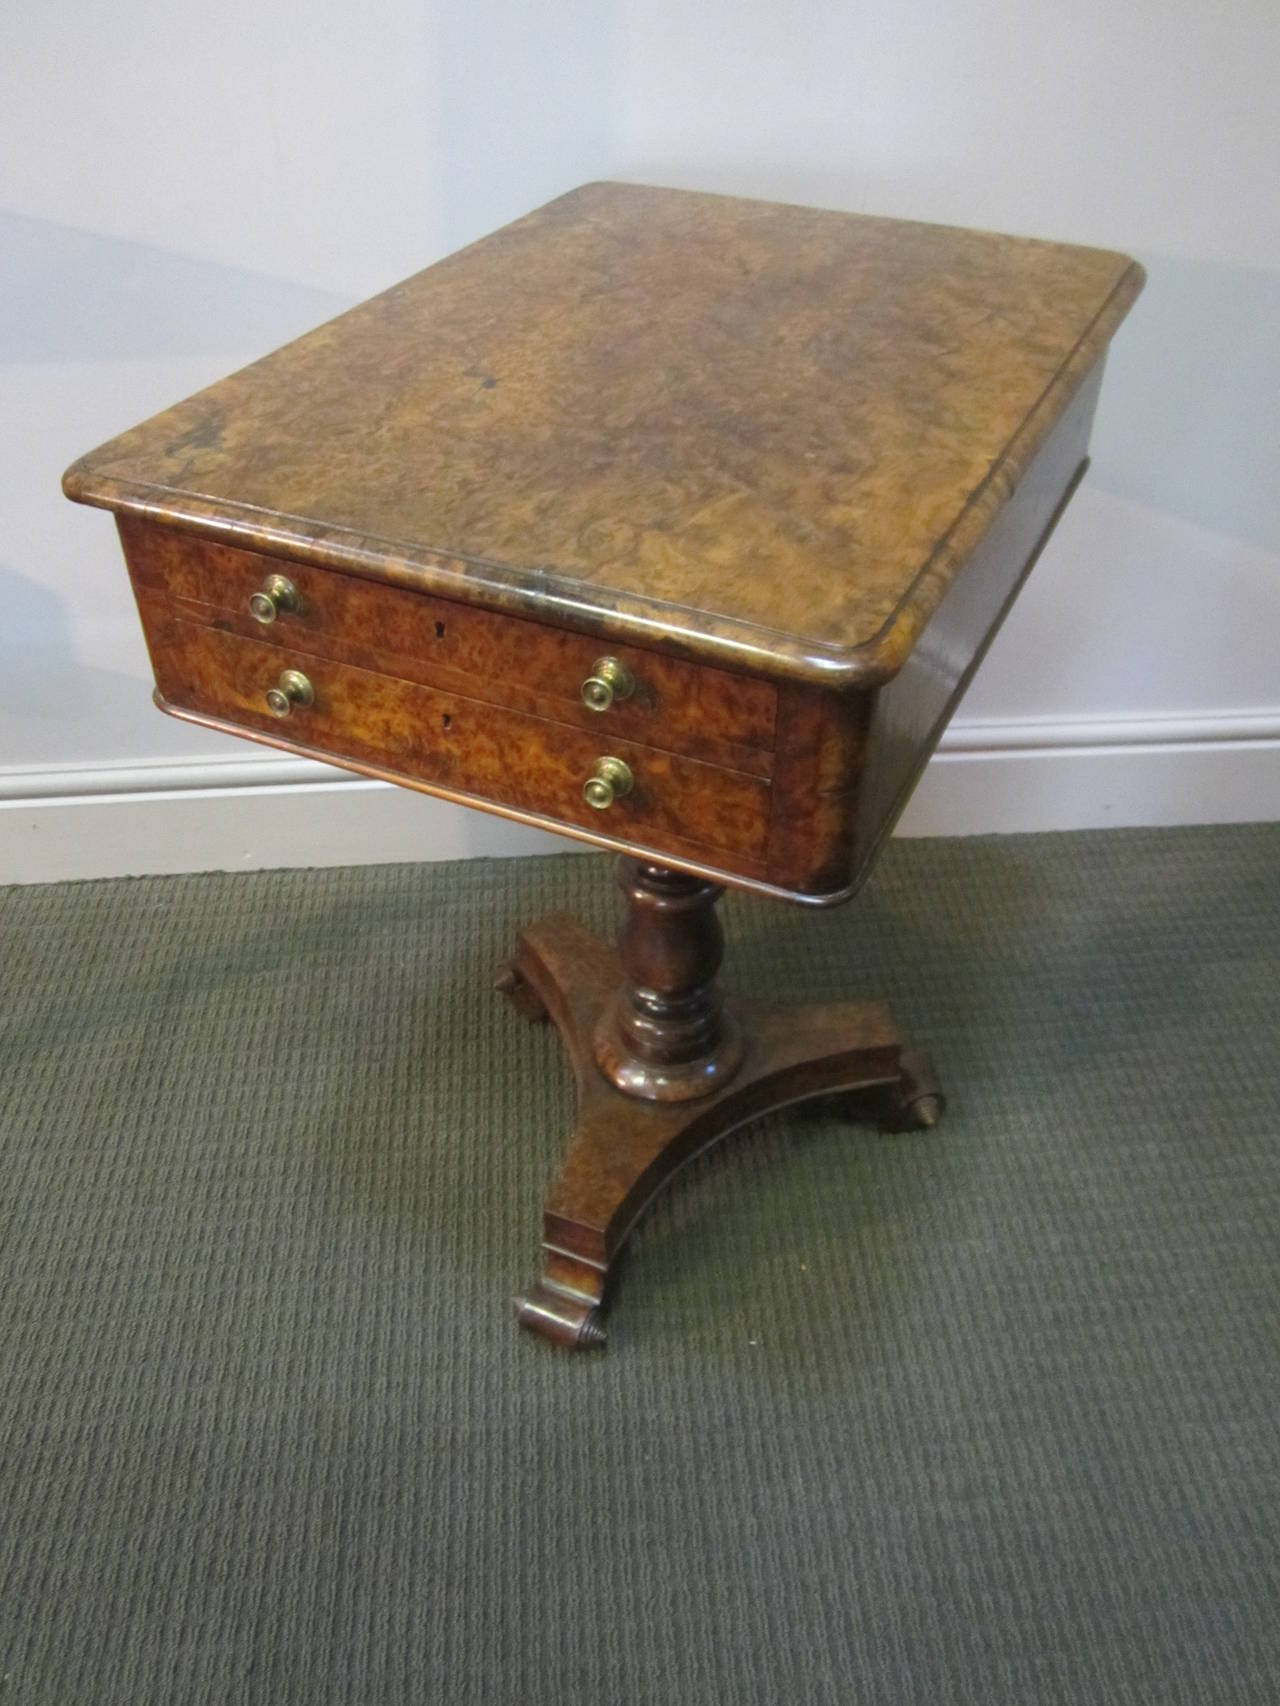 Rare early 19th century burr yew wood pedestal workbox on stand with two drawers at either end, the box on turned central column resting on scrolled feet with casters. Great colour.